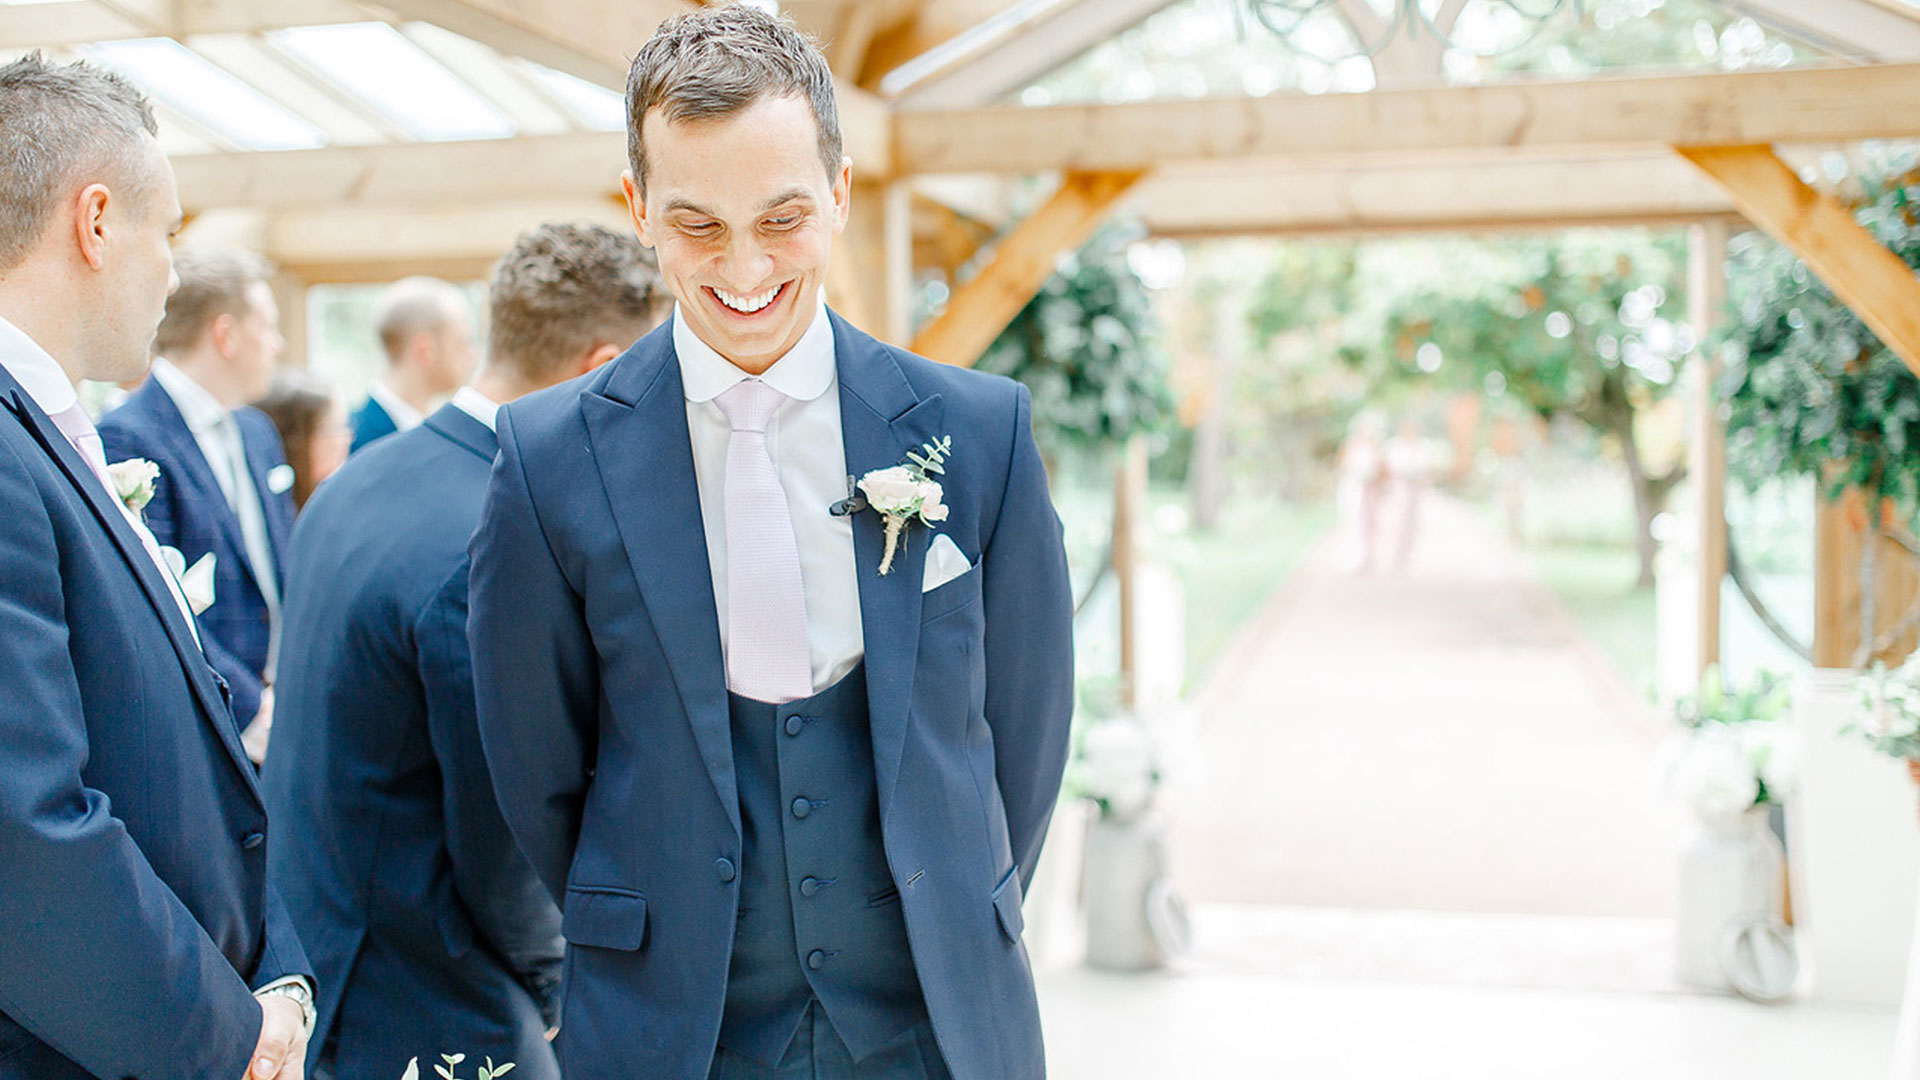 A smiling groom awaits the arrival of his bride in the Orangery - wedding ceremony venues Essex